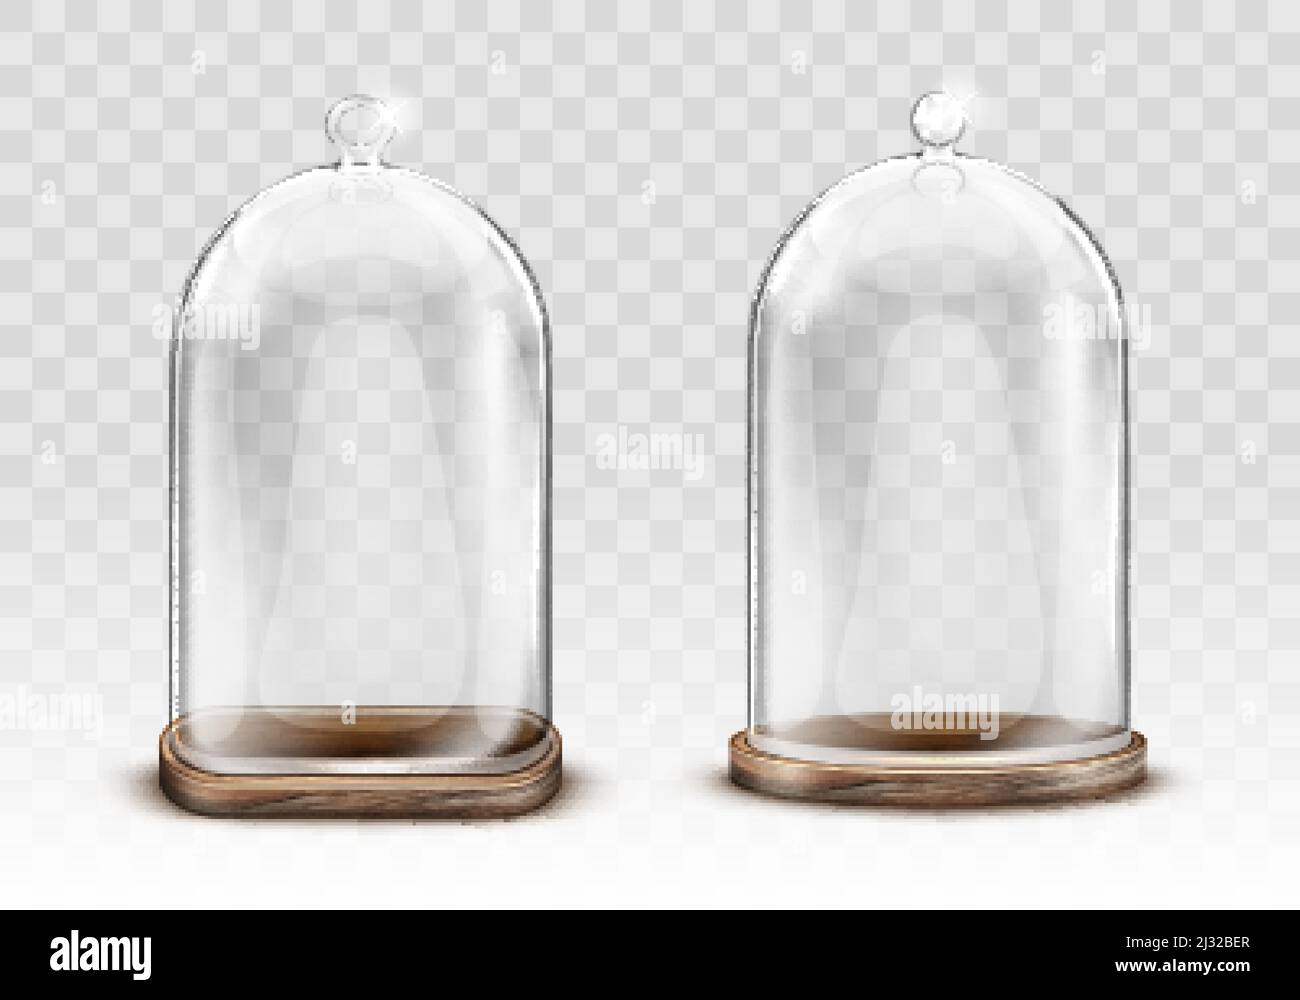 Vintage glass dome and old wooden tray realistic vector. Retro transparent glass dome square shape with knob handle, storage container, product presen Stock Vector